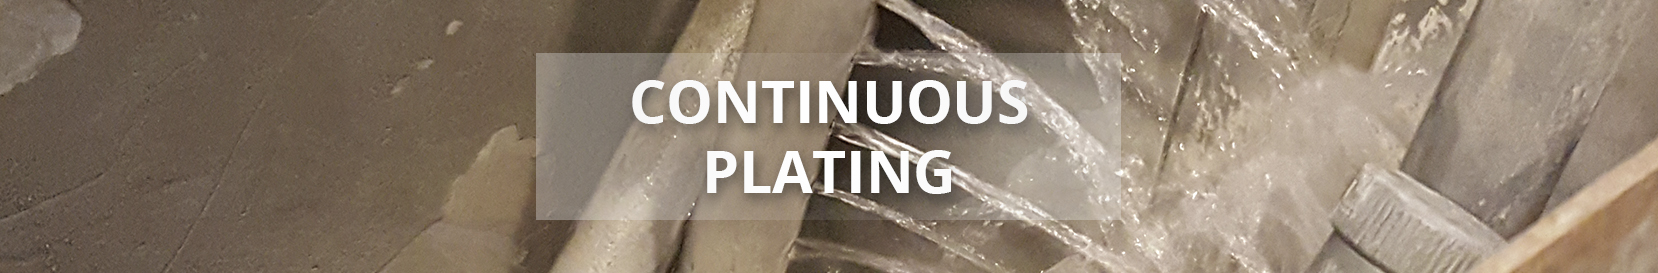 Precision Process - continuous Plating - Plating Accessories